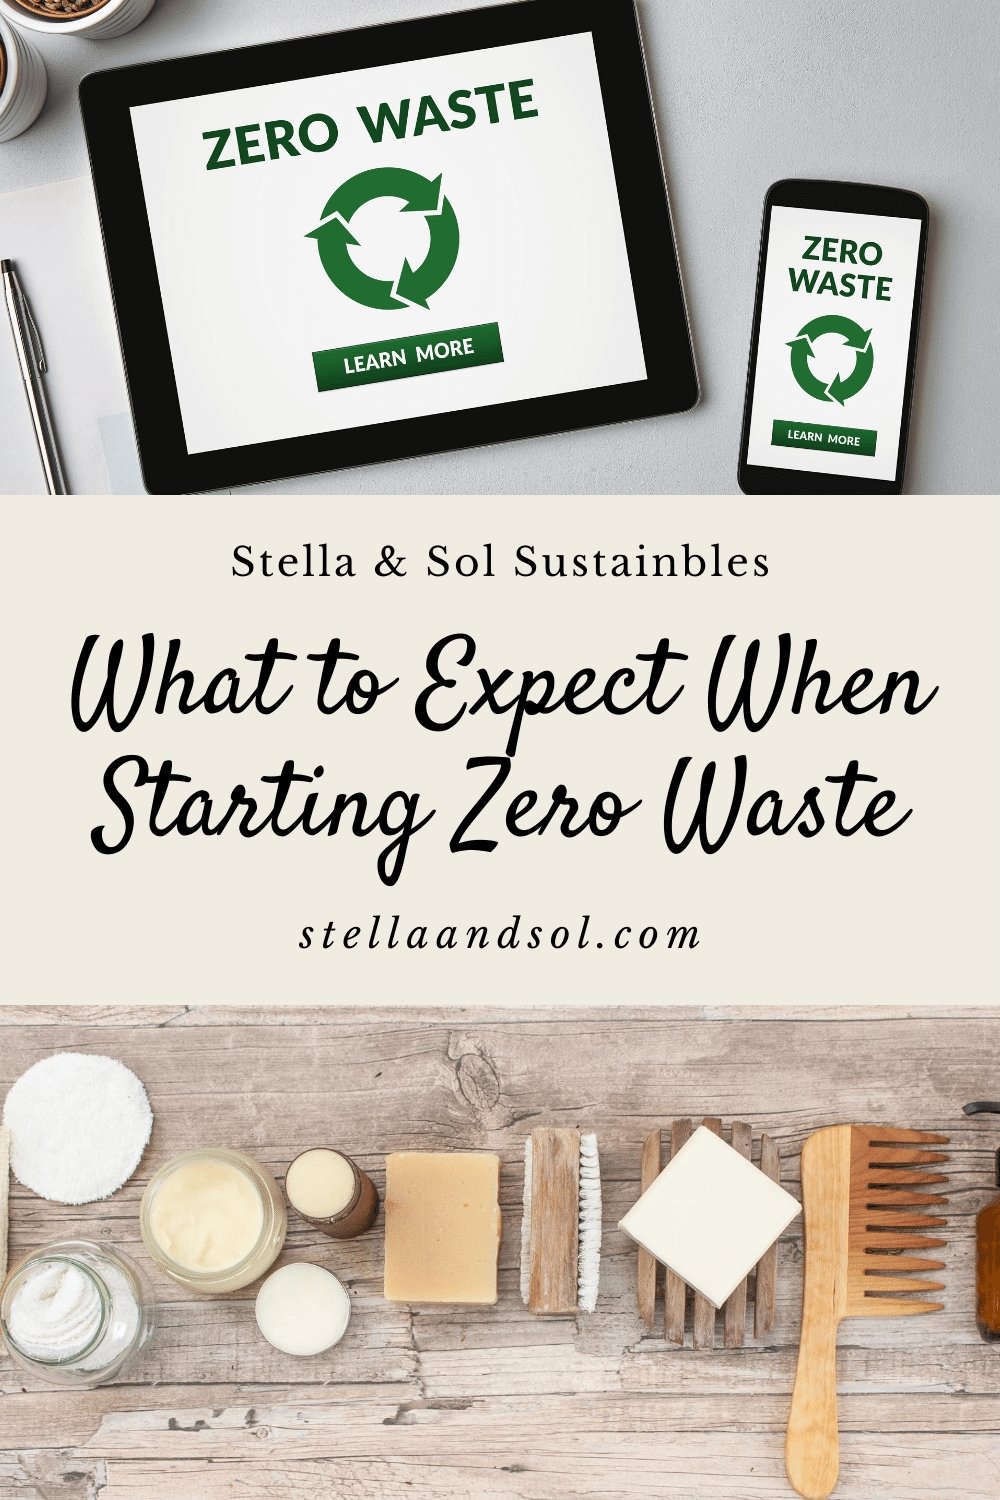 10 Things I Wish I'd Known About Going Zero Waste - Stella & Sol Sustainables